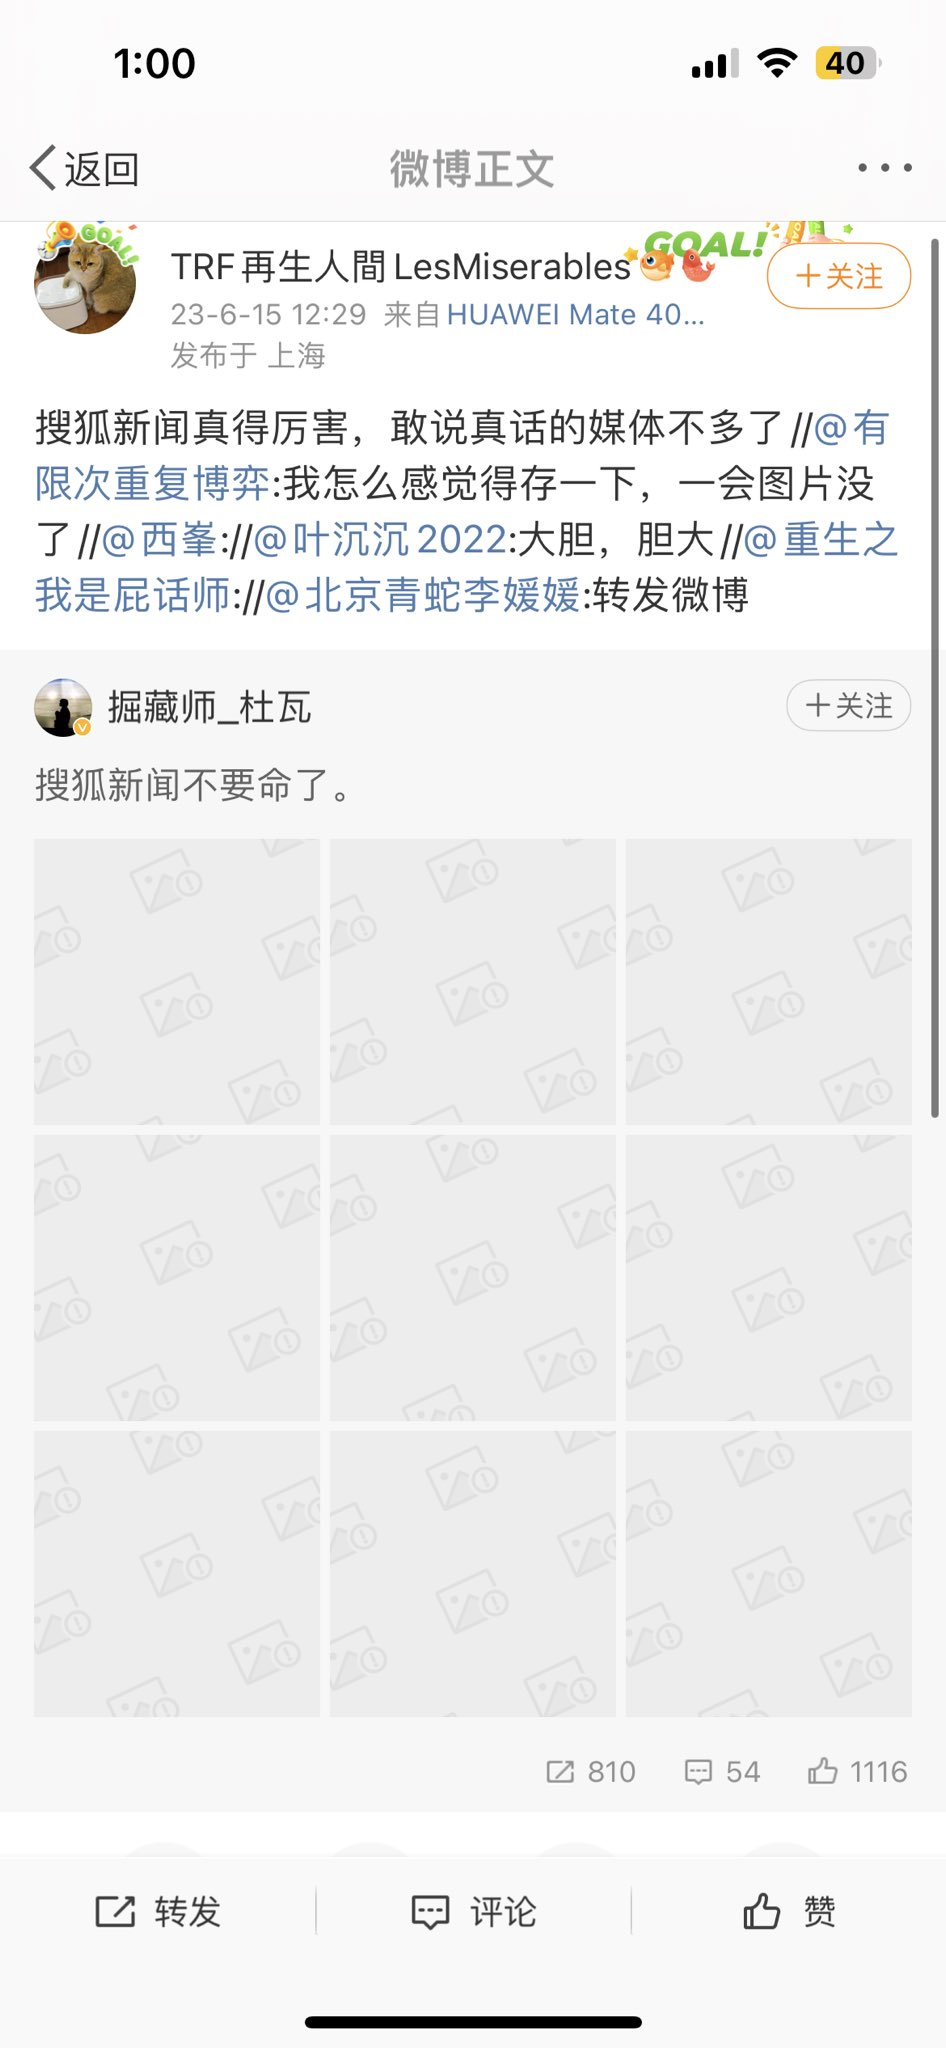 Another screenshot of the Weibo post shows that all nine thumbnail images have been replaced by the blank gray boxes that Weibo uses to signal censored image content. 